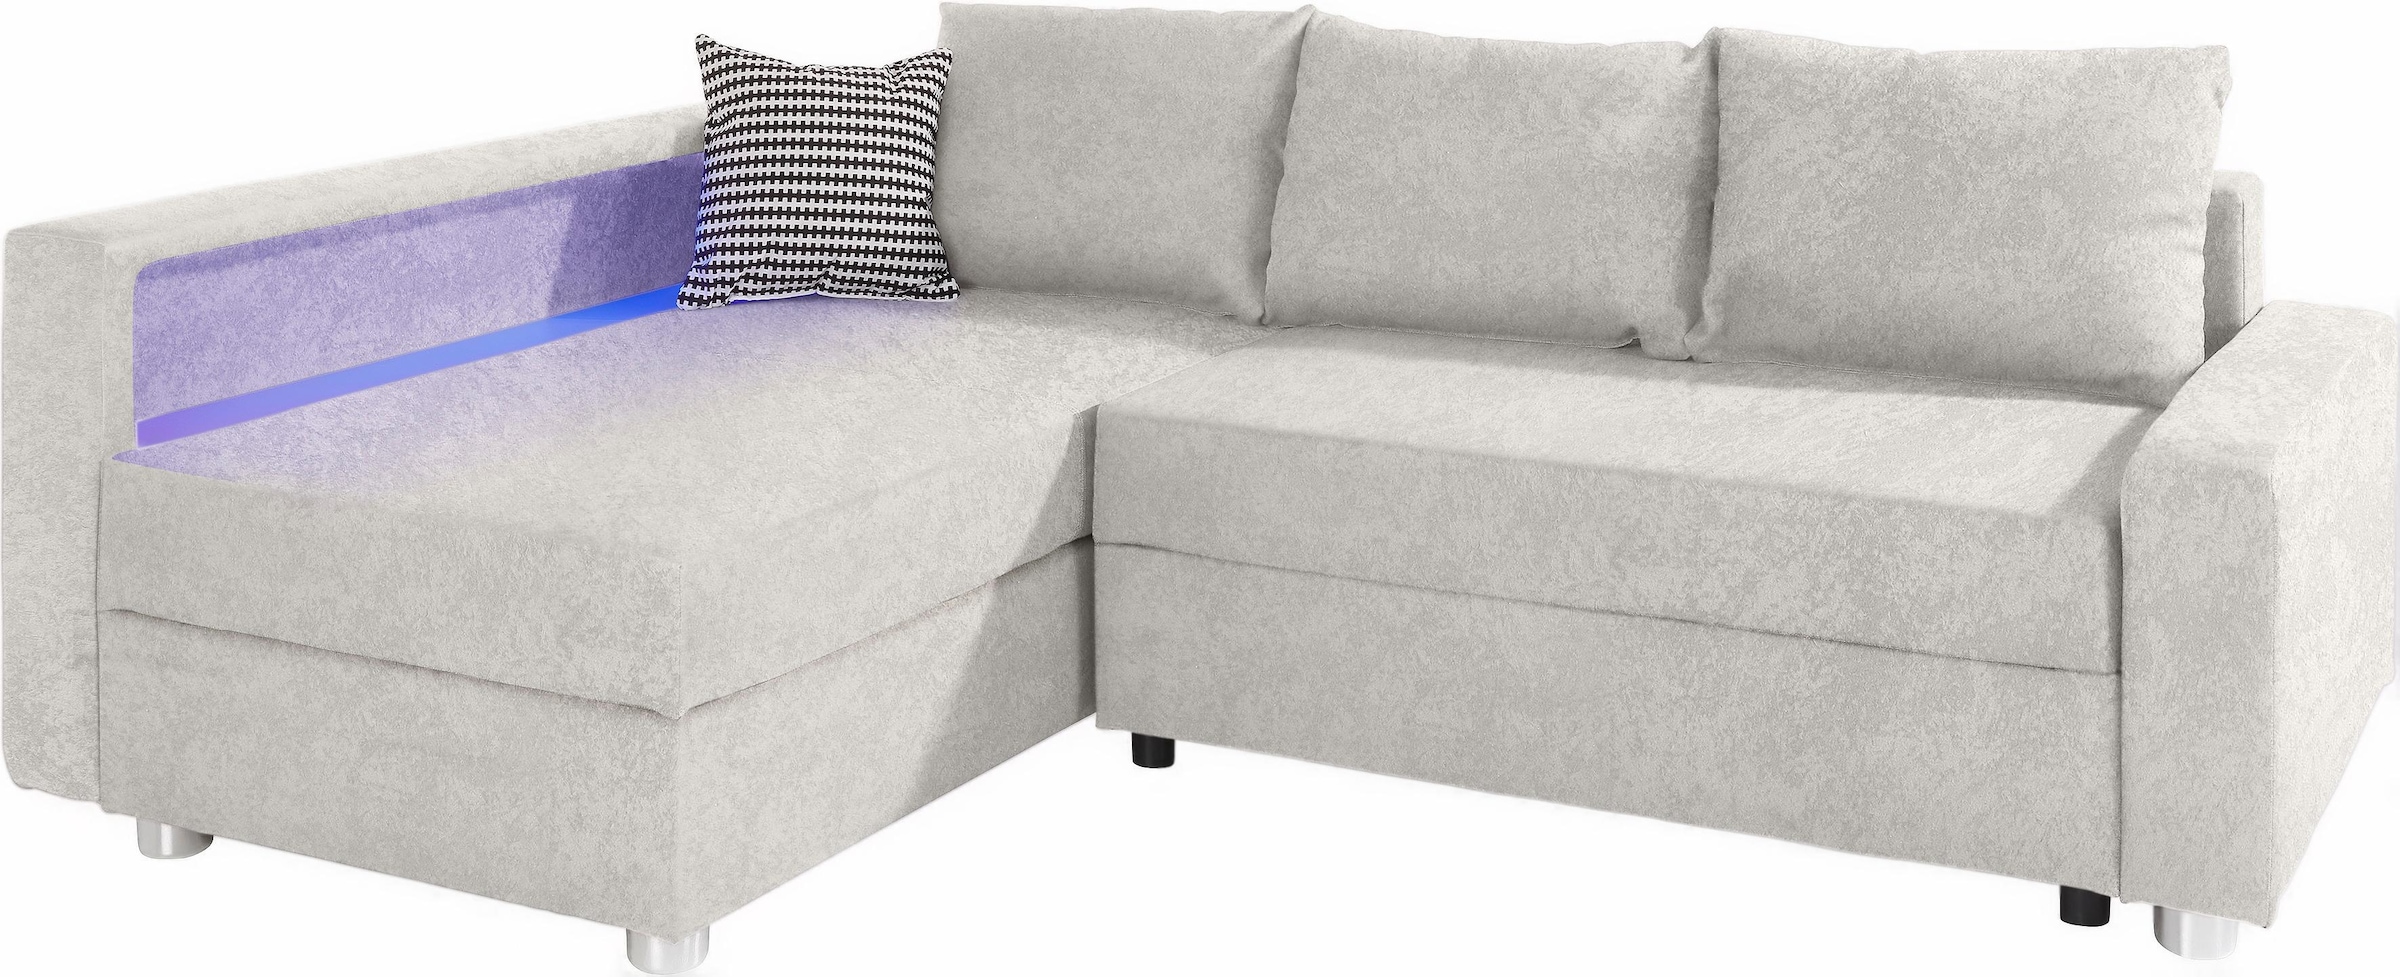 COLLECTION AB Ecksofa »Relax L-Form«, inklusive Bettfunktion, Federkern, wahlweise mit RGB-LED-Beleuchtung